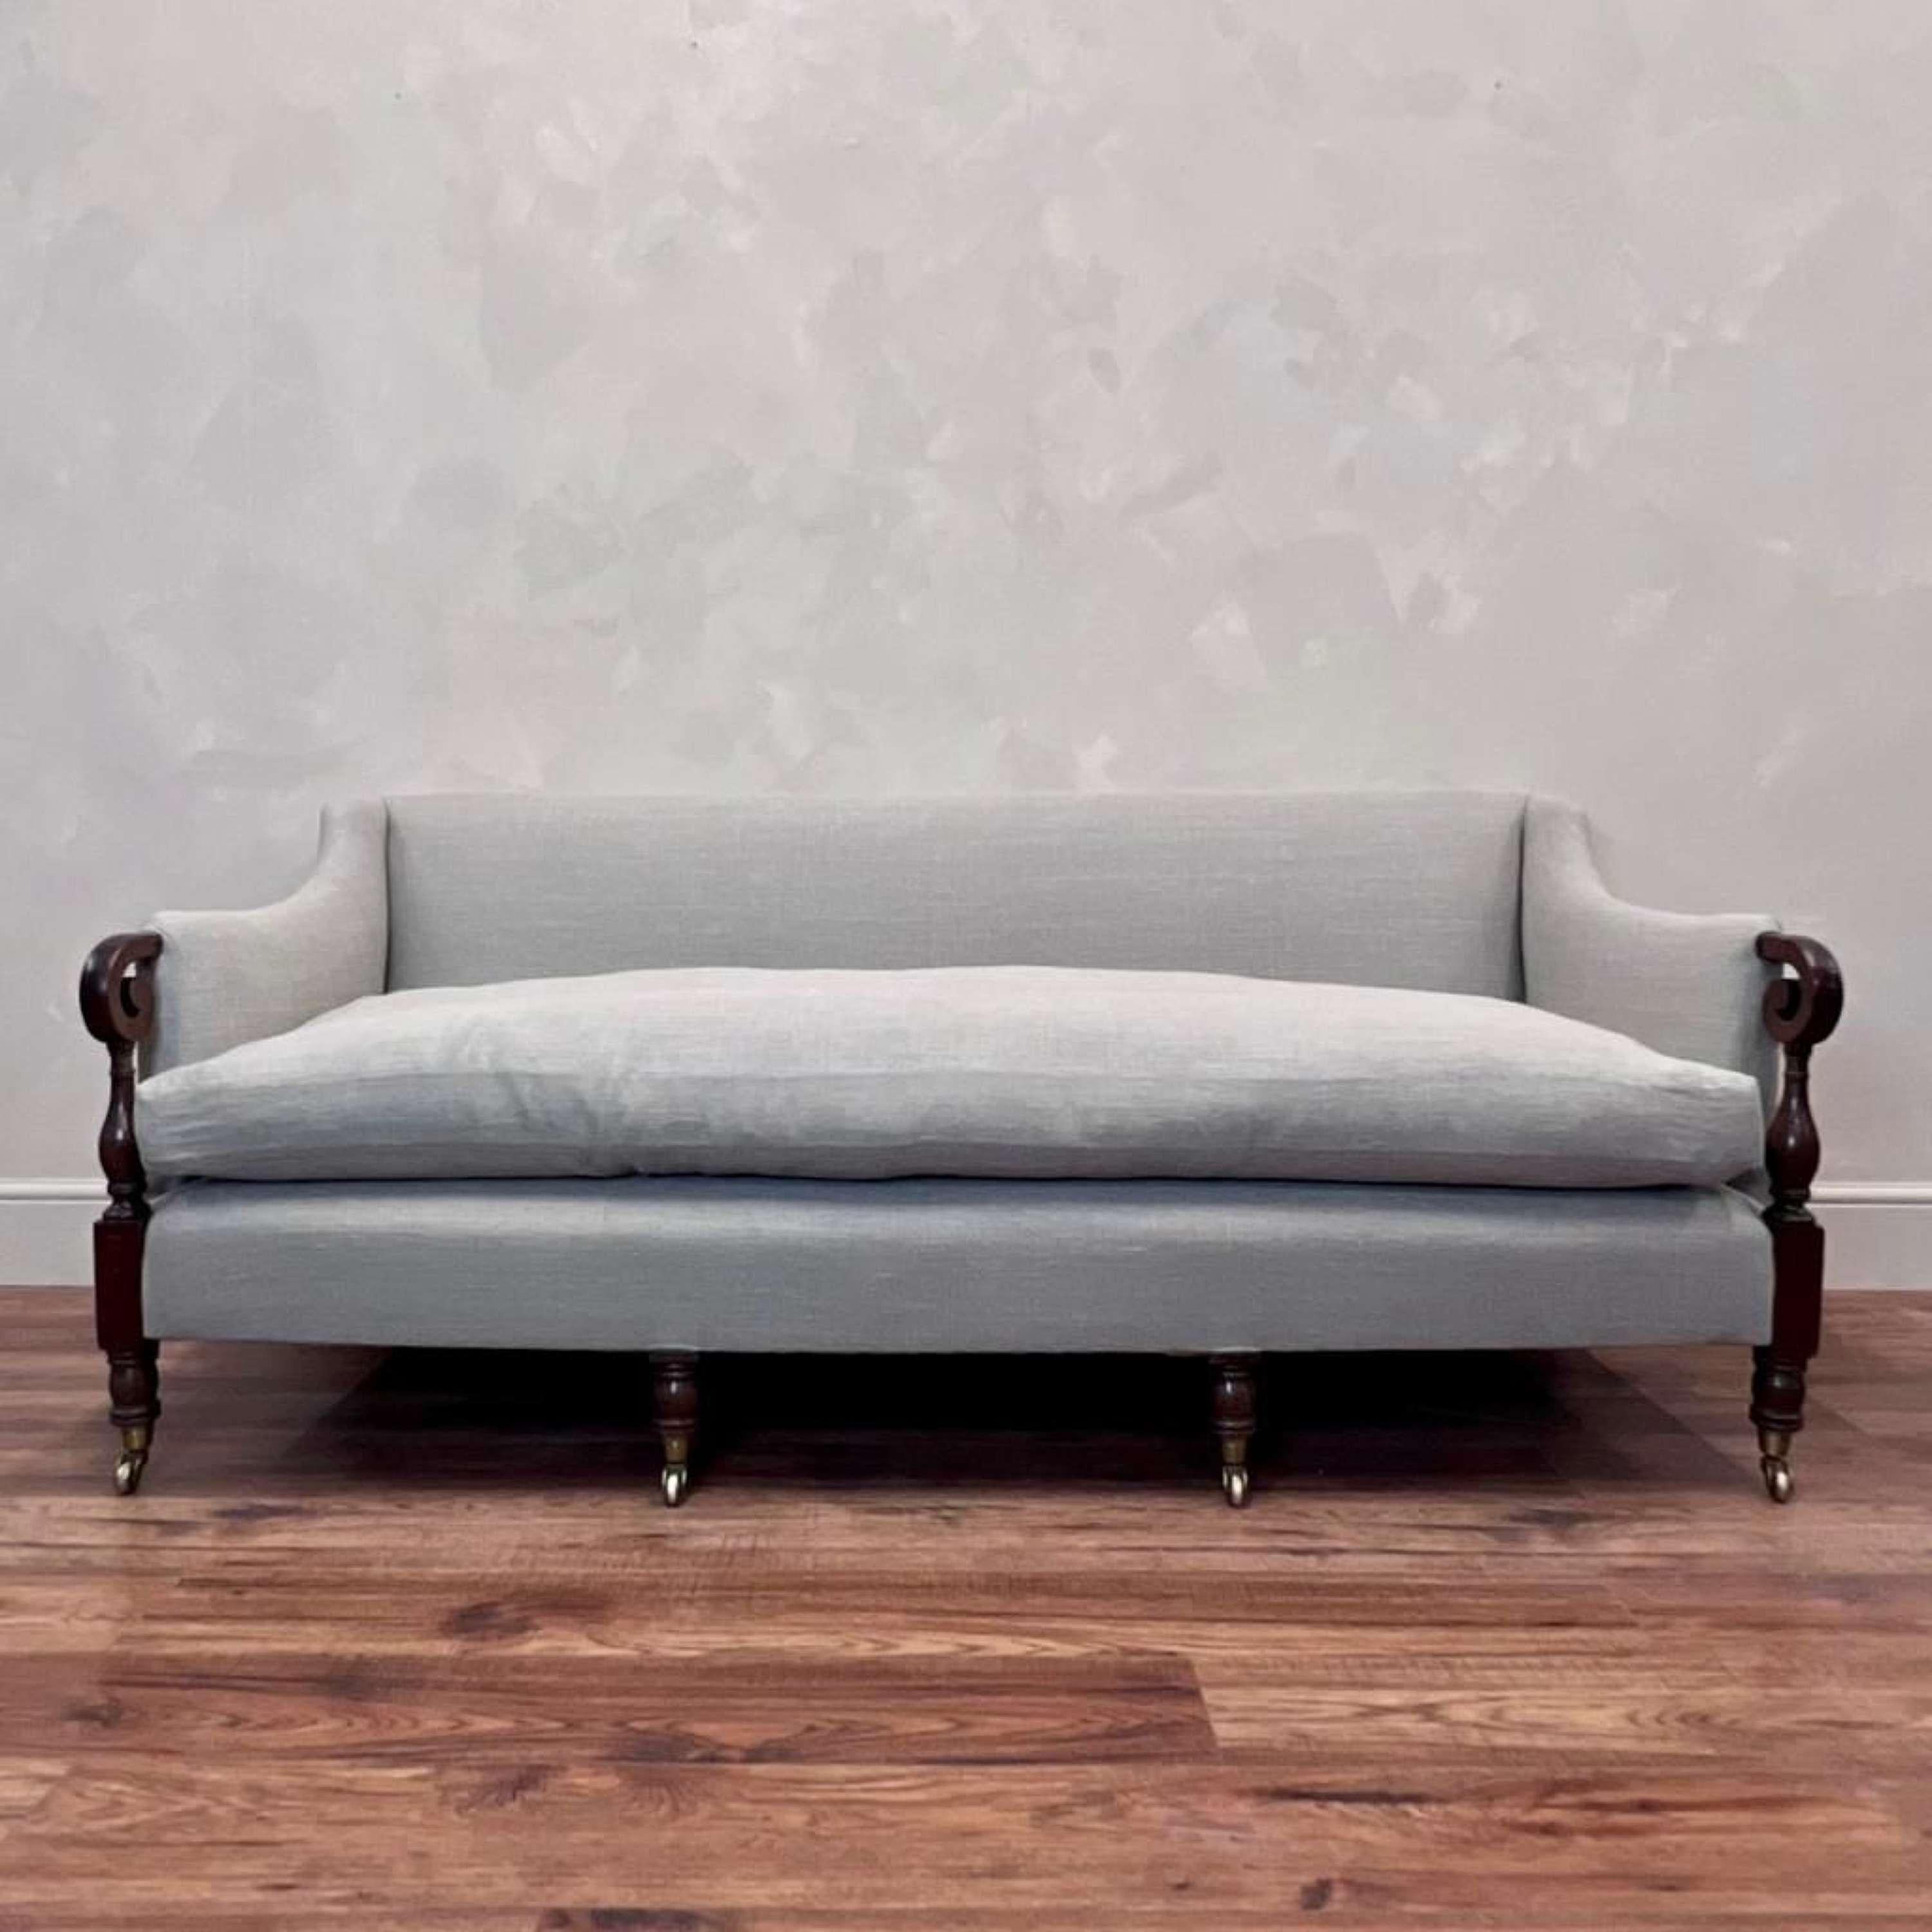 Mahogany scrolled arm sofa.
6 legs with origonal brass castors.
Newly upholstered in quality linen fabric, bespoke large feather squab cushion.
This piece is so comfortable and a great size 


English c1880

Length - 187 cm
Depth - 81 cm
Back Height